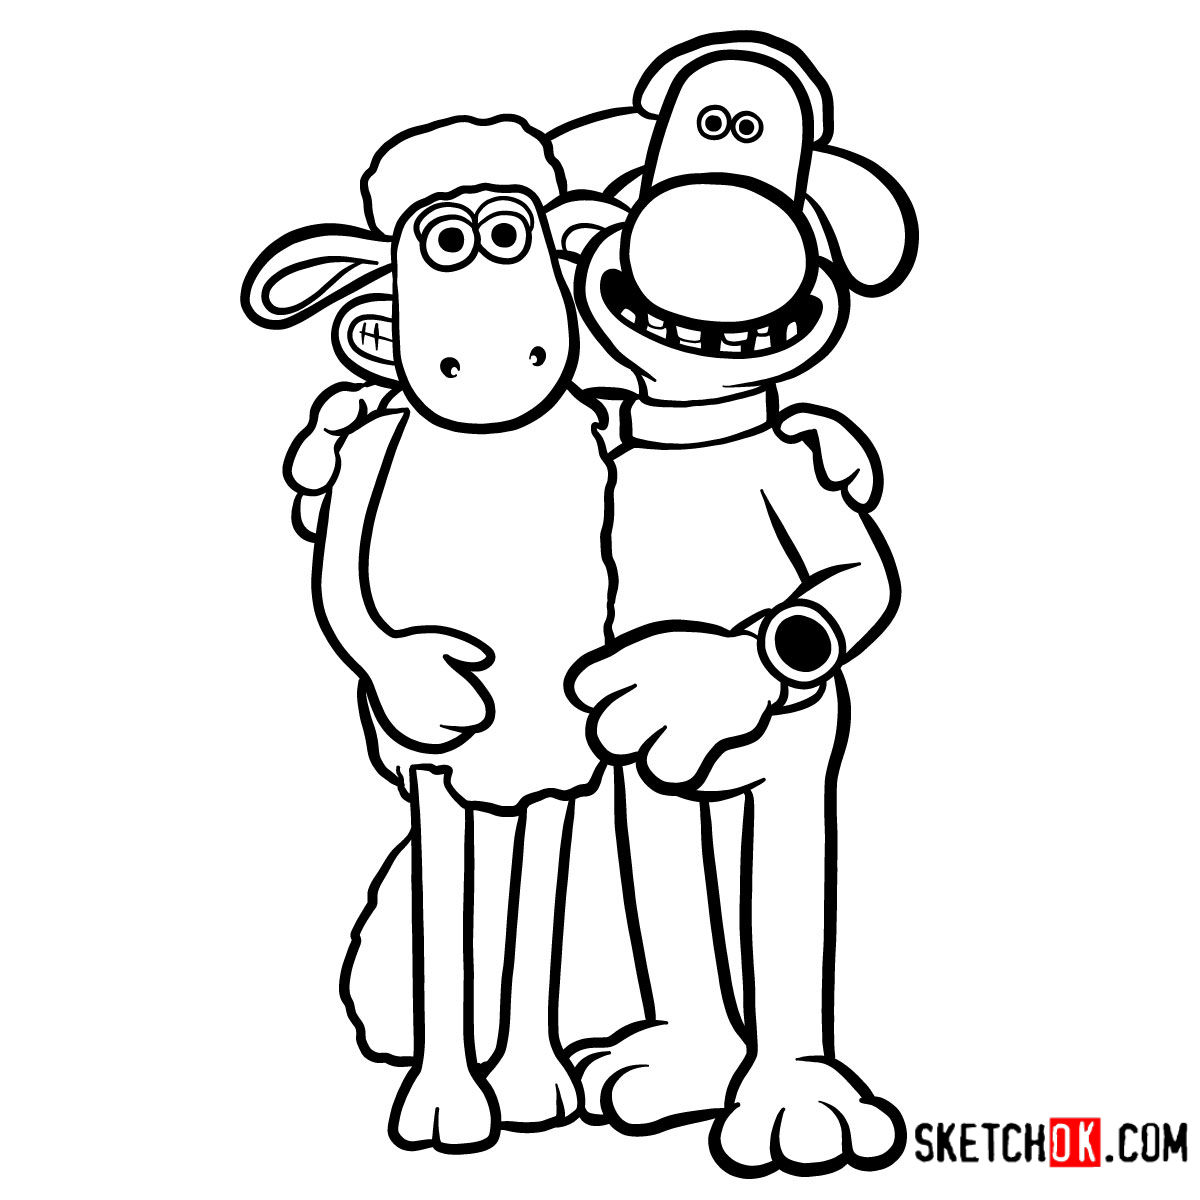 How to draw Shaun the Sheep and Bitzer together